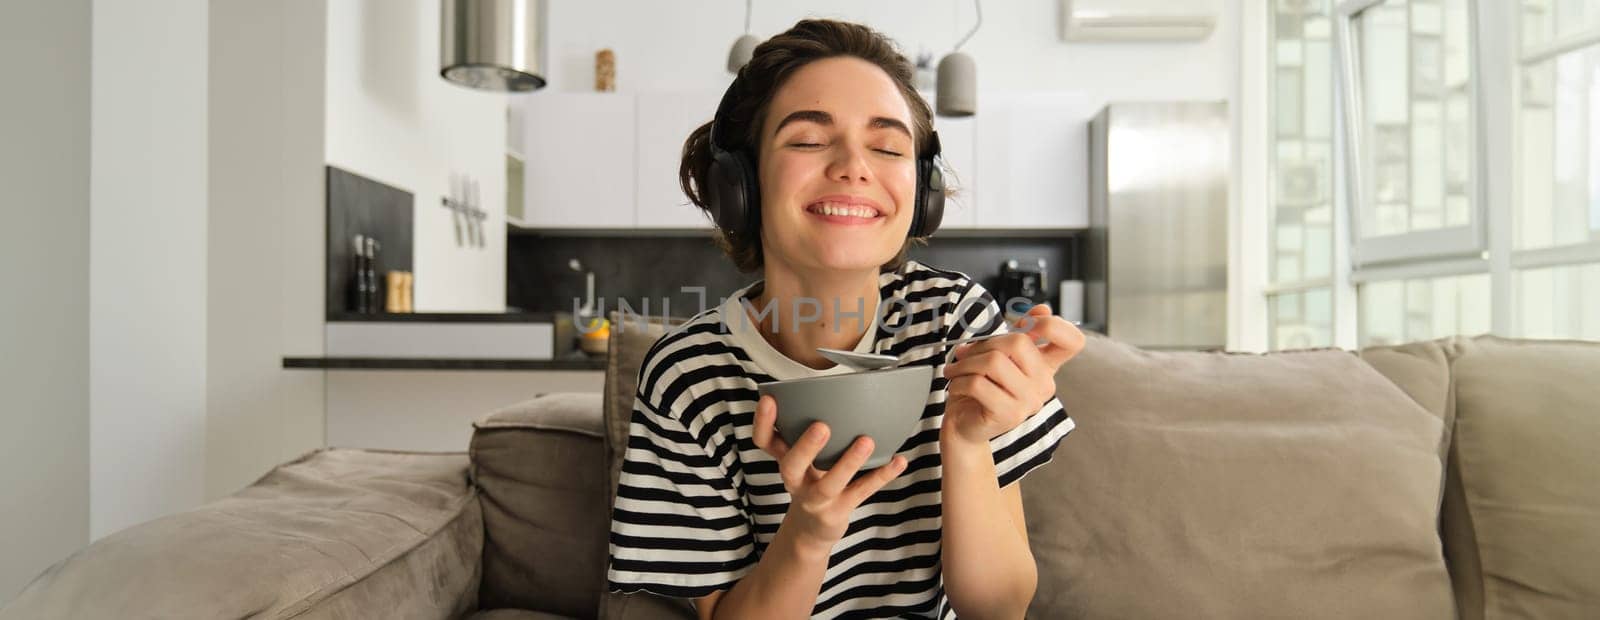 Portrait of woman laughing and smiling in headphones, eating cereals for breakfast and sitting on sofa in front of tv.